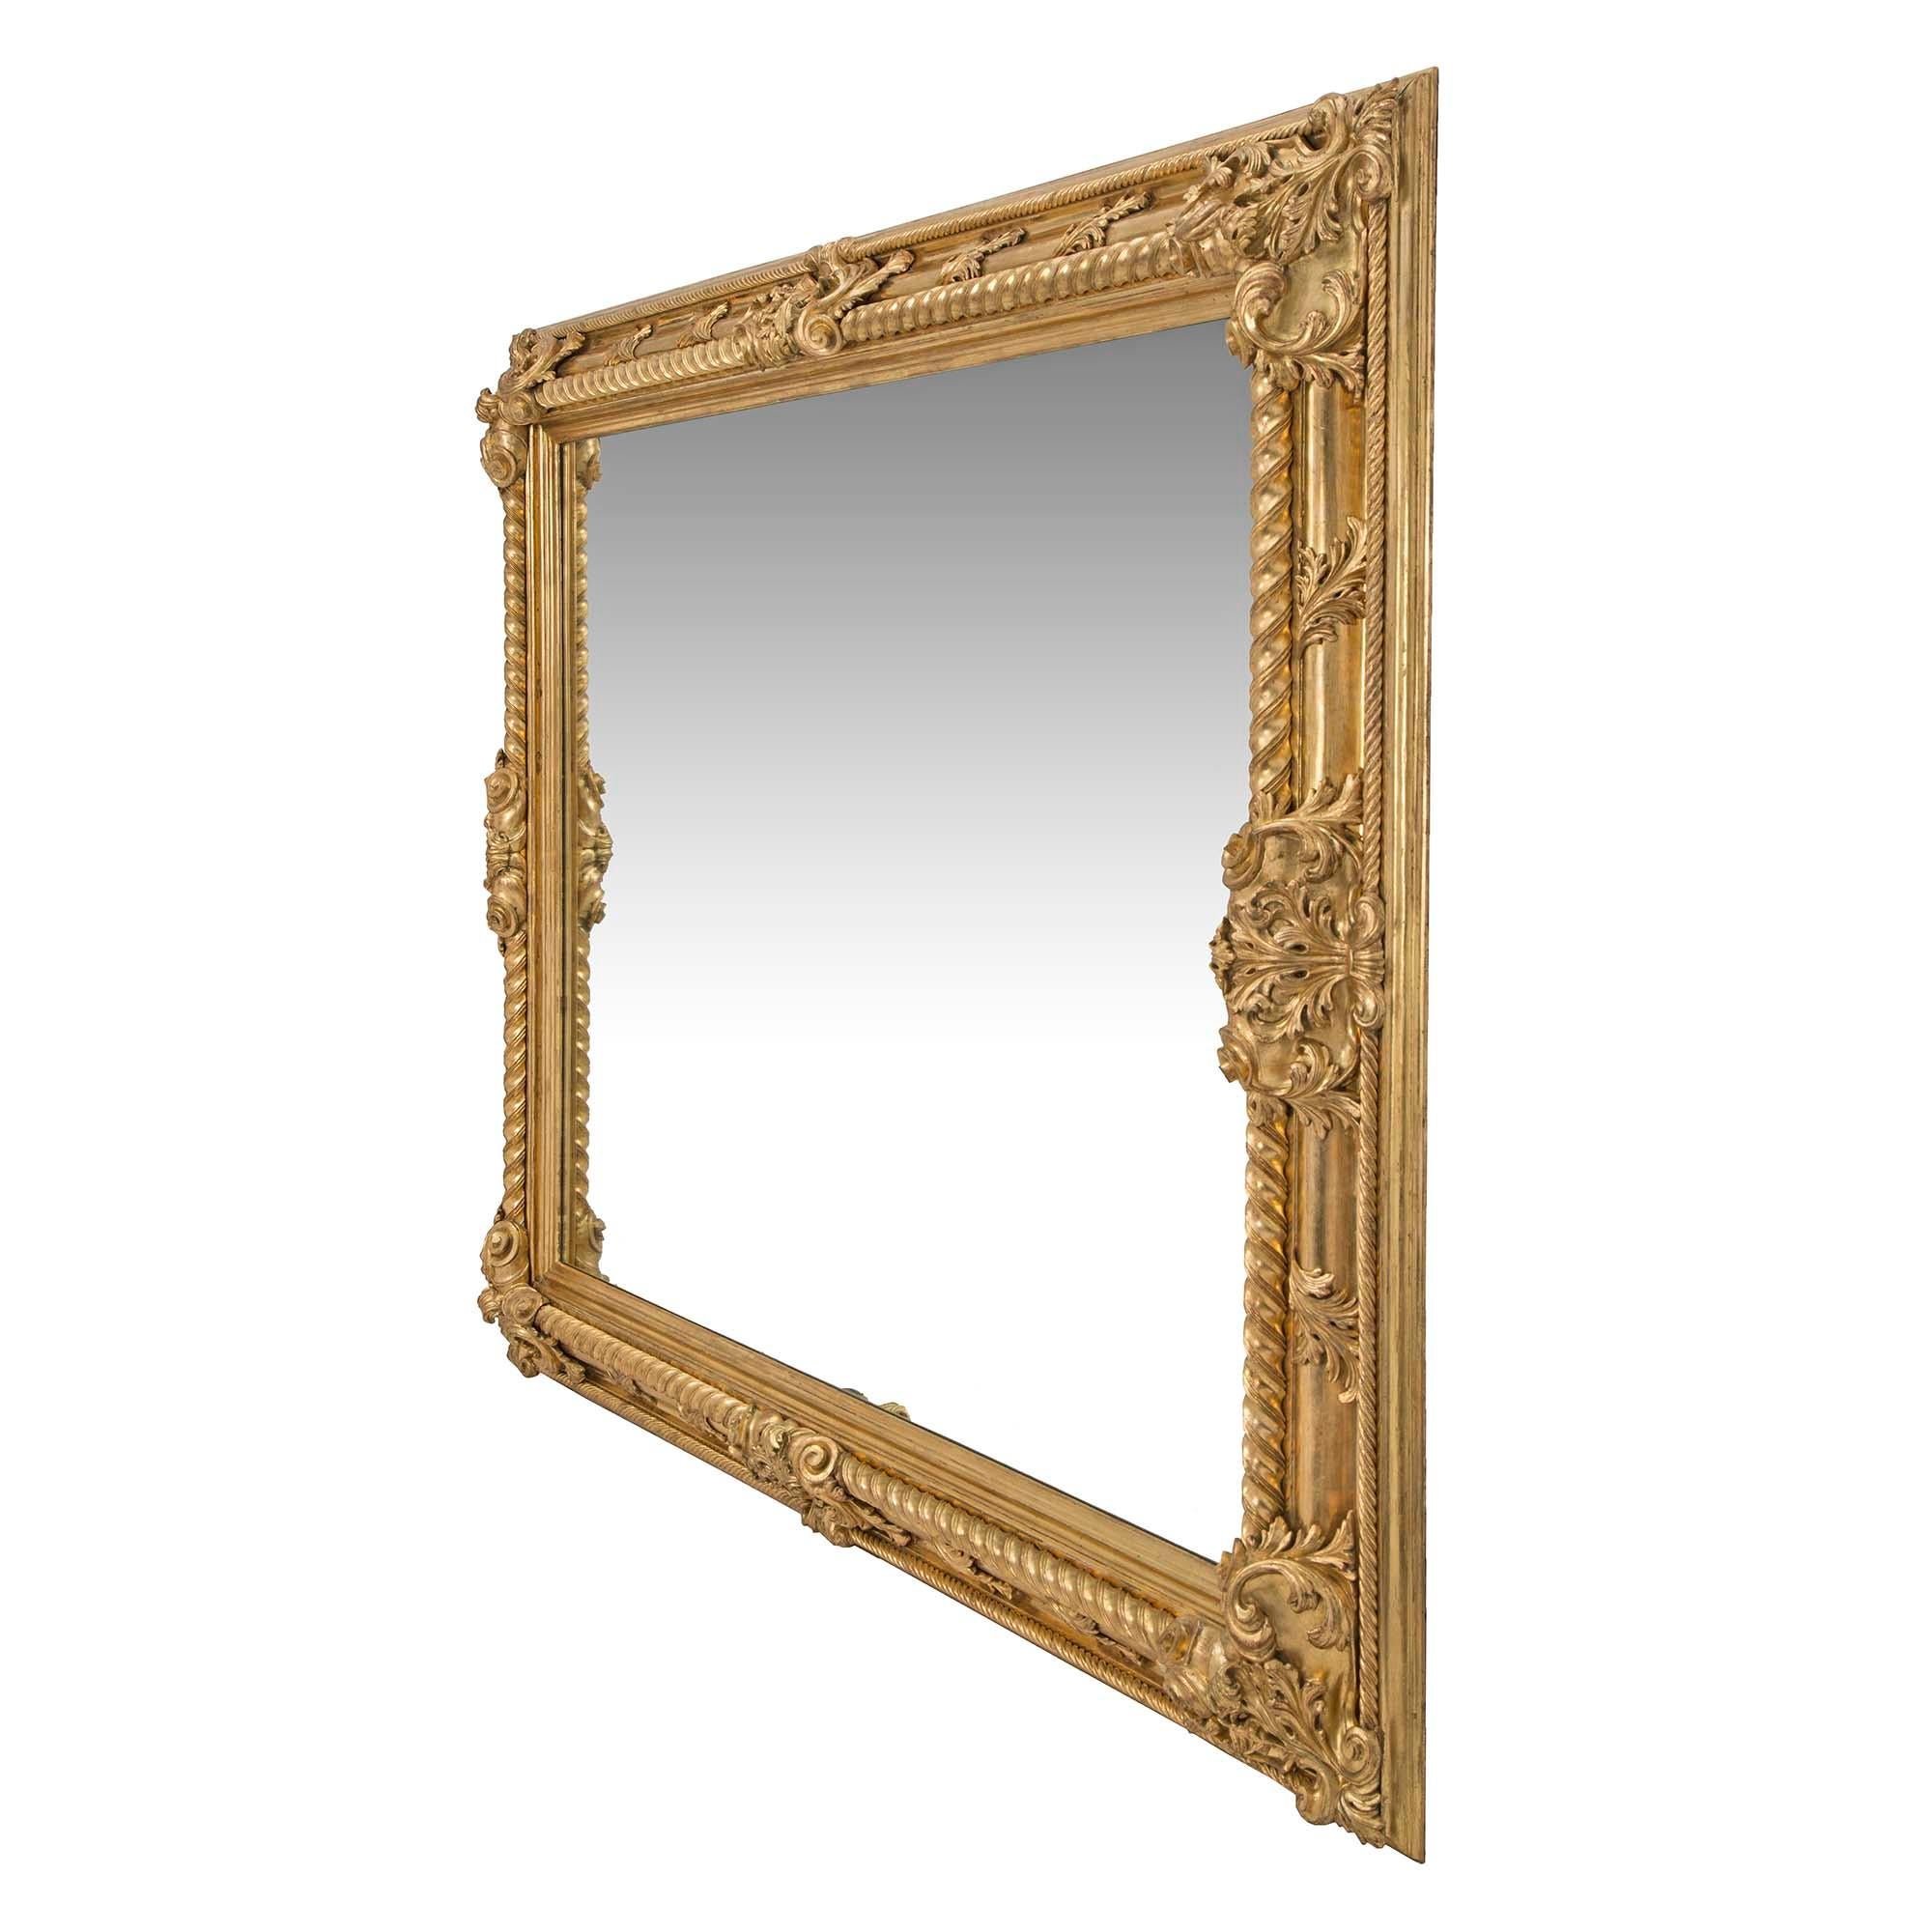 A large scale Italian 19th century Louis XIV st. rectangular giltwood mirror. The finely carved mirror has a twisted ribbon inner and outer border, accented at each corner and sides with finely scrolled acanthus leaf designs. With all original gilt